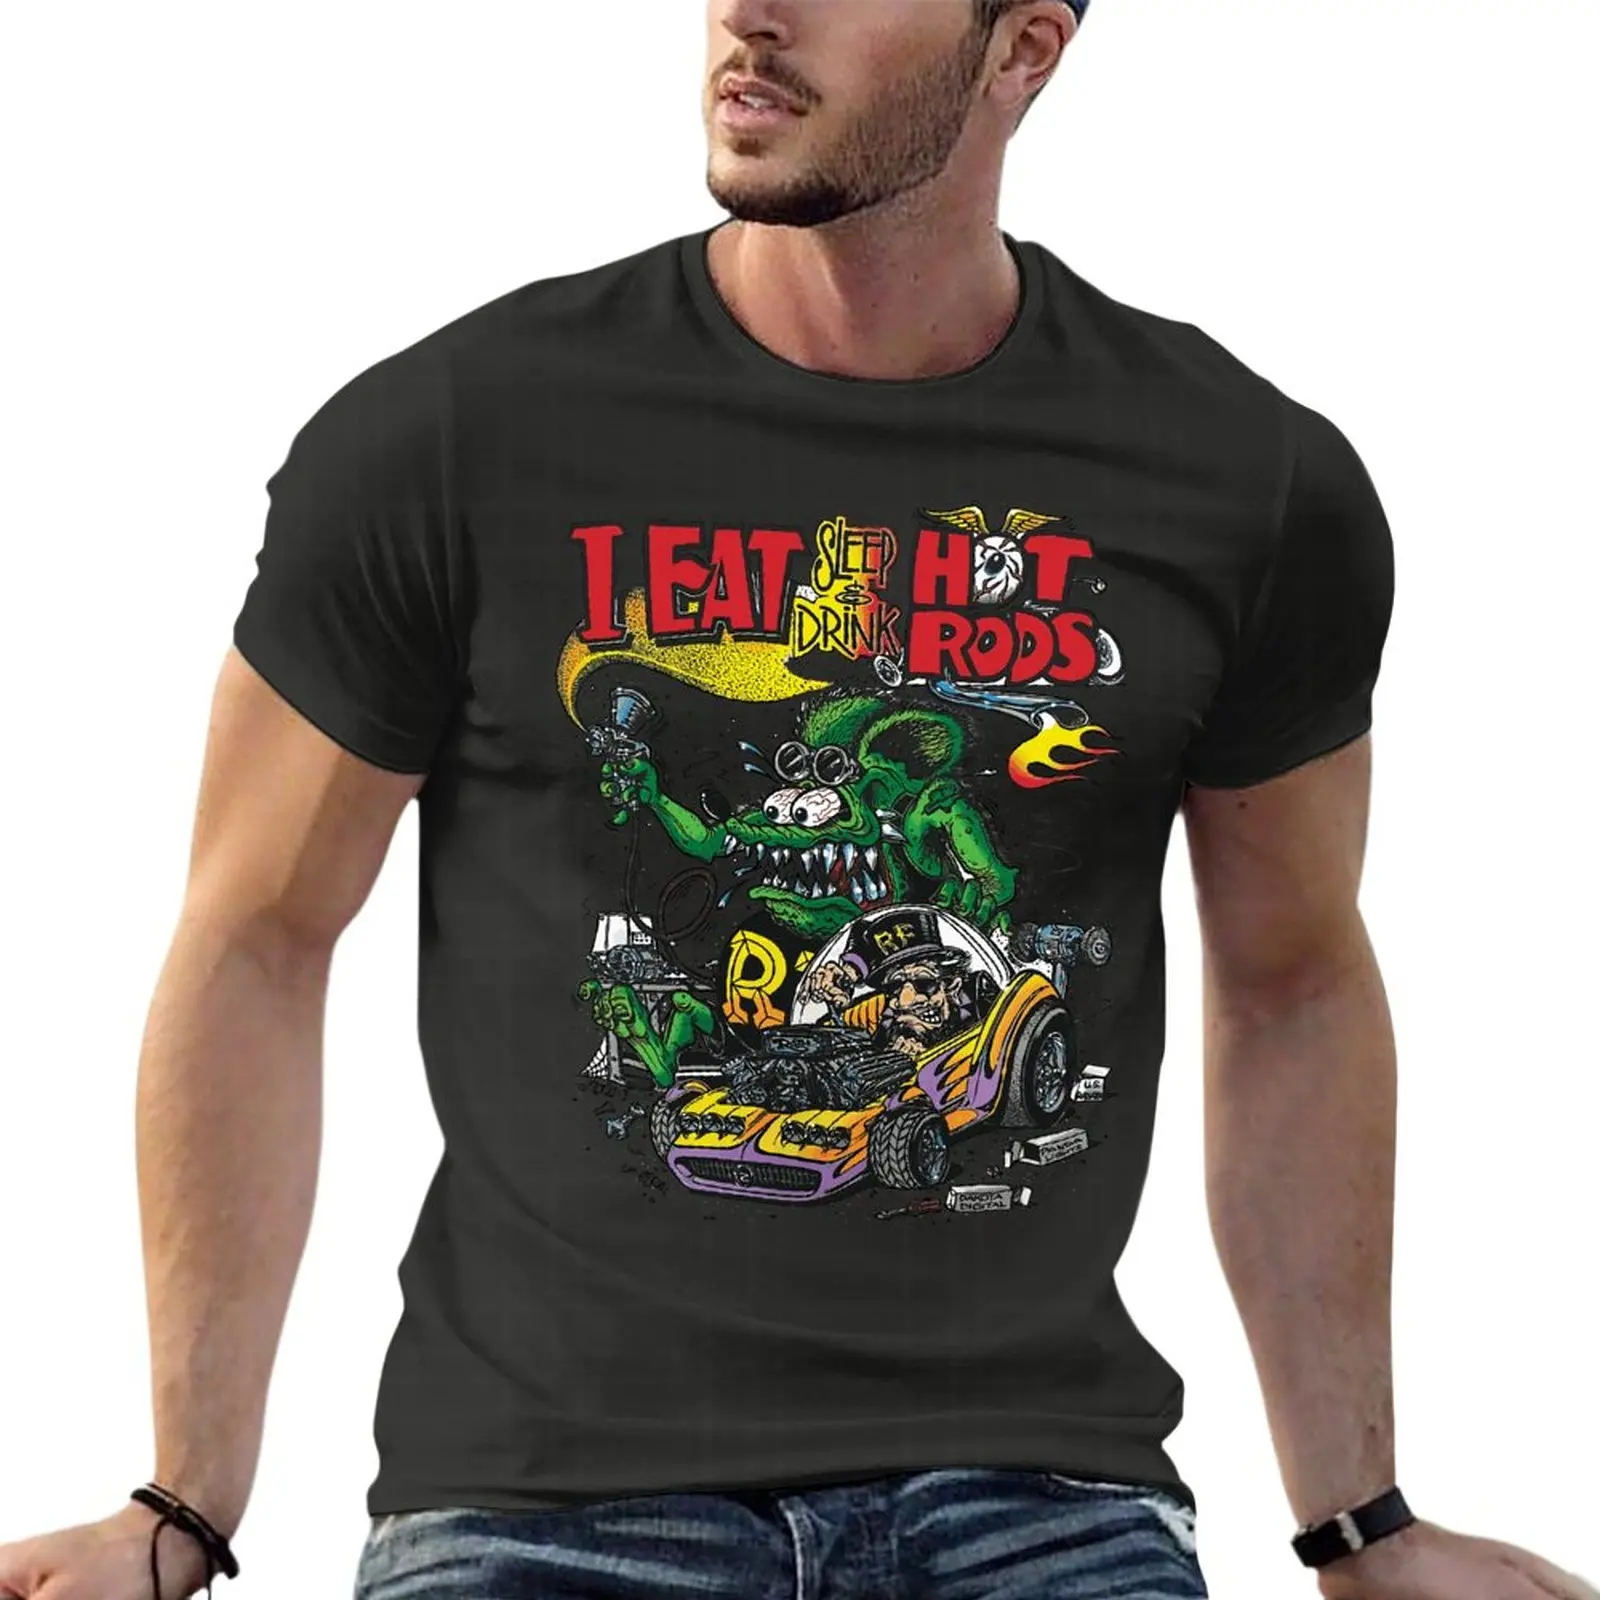 

Ed Big Daddy Roth Rat Fink Eat Drink Hotrods Oversize T Shirts Funny Men'S Clothes Short Sleeve Streetwear Big Size Tops Tee